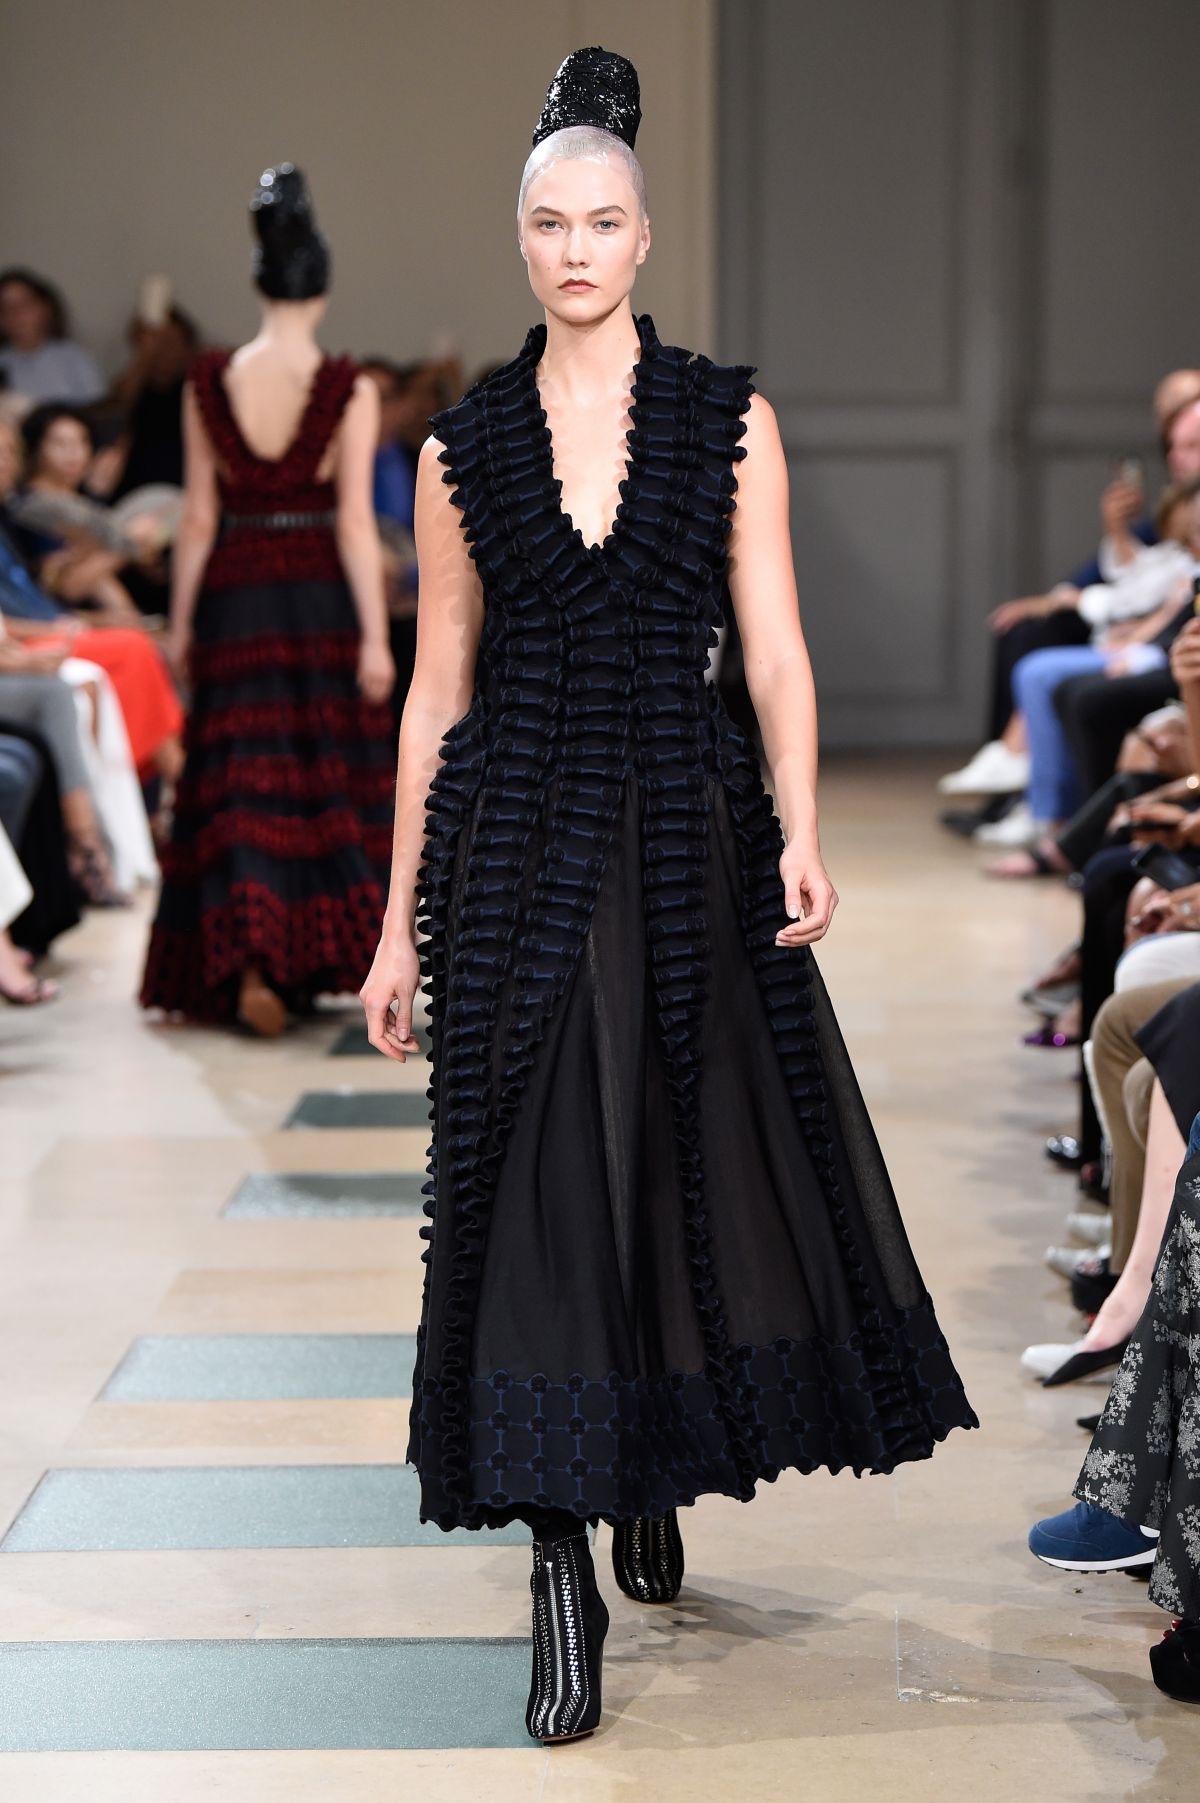 KARLIE KLOSS at Azzedine Alaia Runway Show at Haute Couture Fashion ...